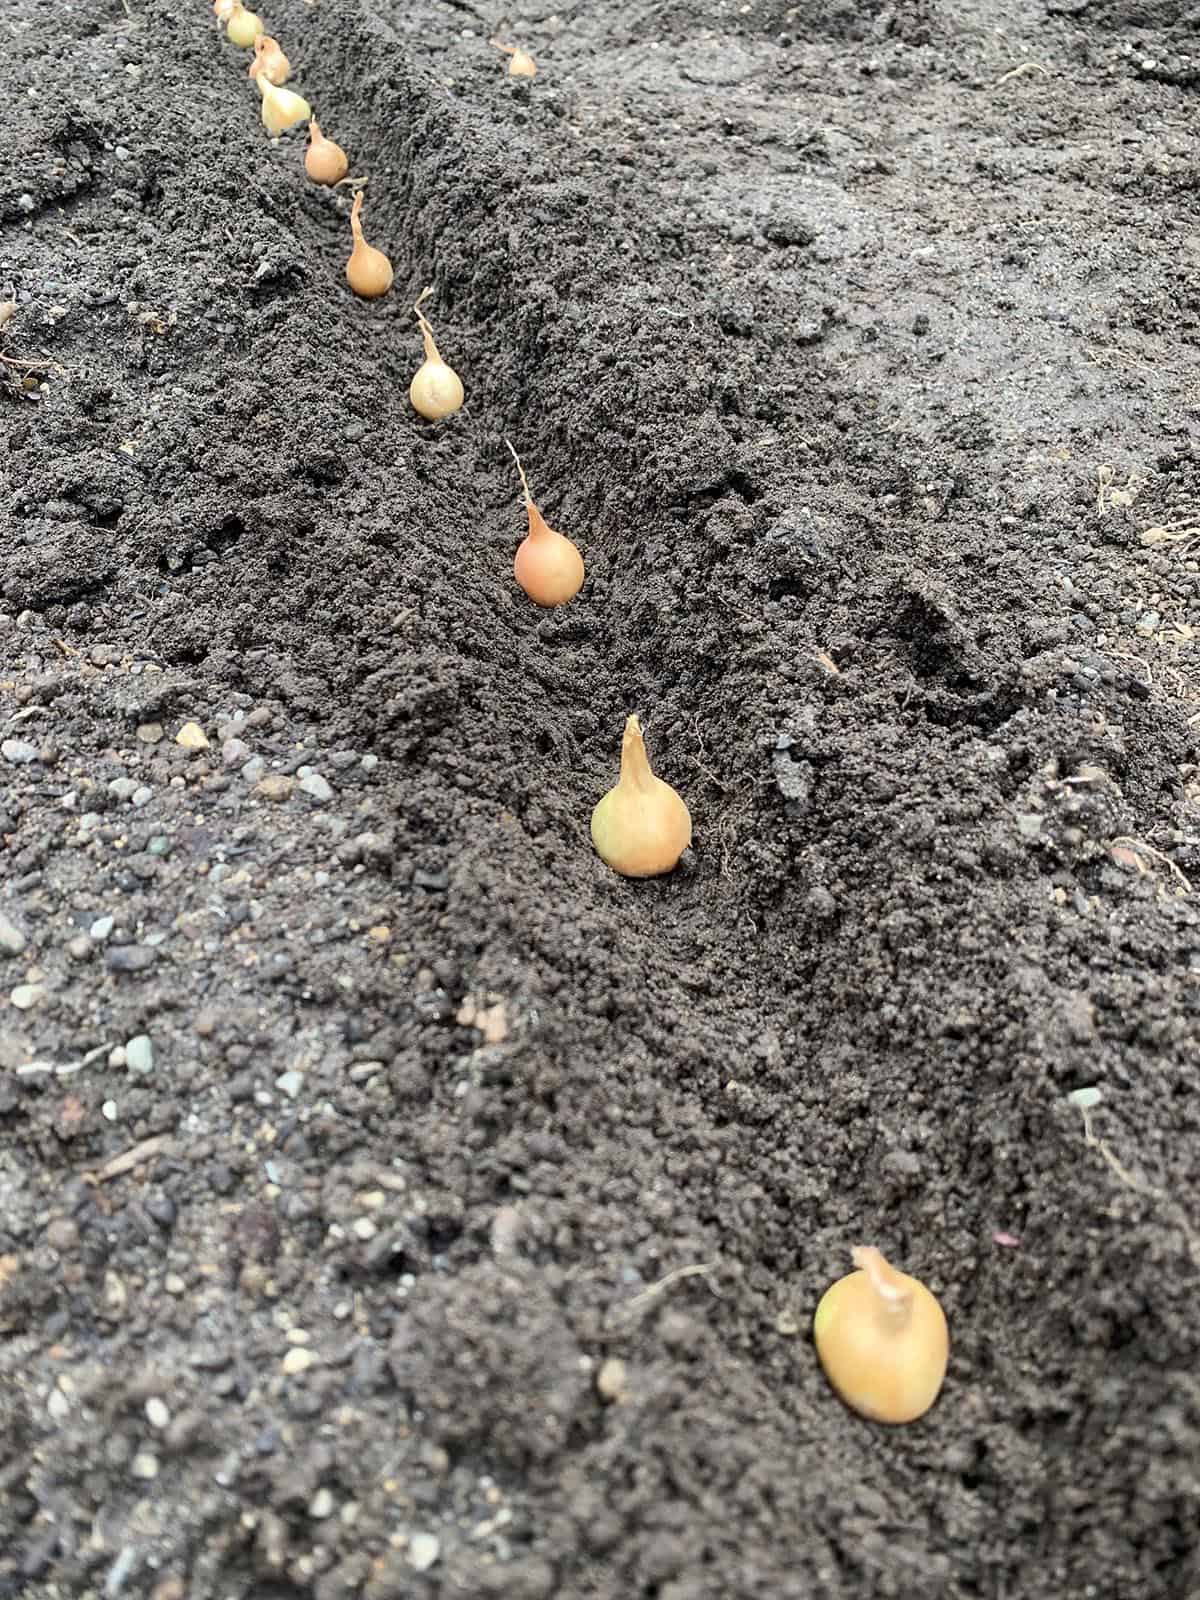 Onion sets being planted in a row in a garden bed.